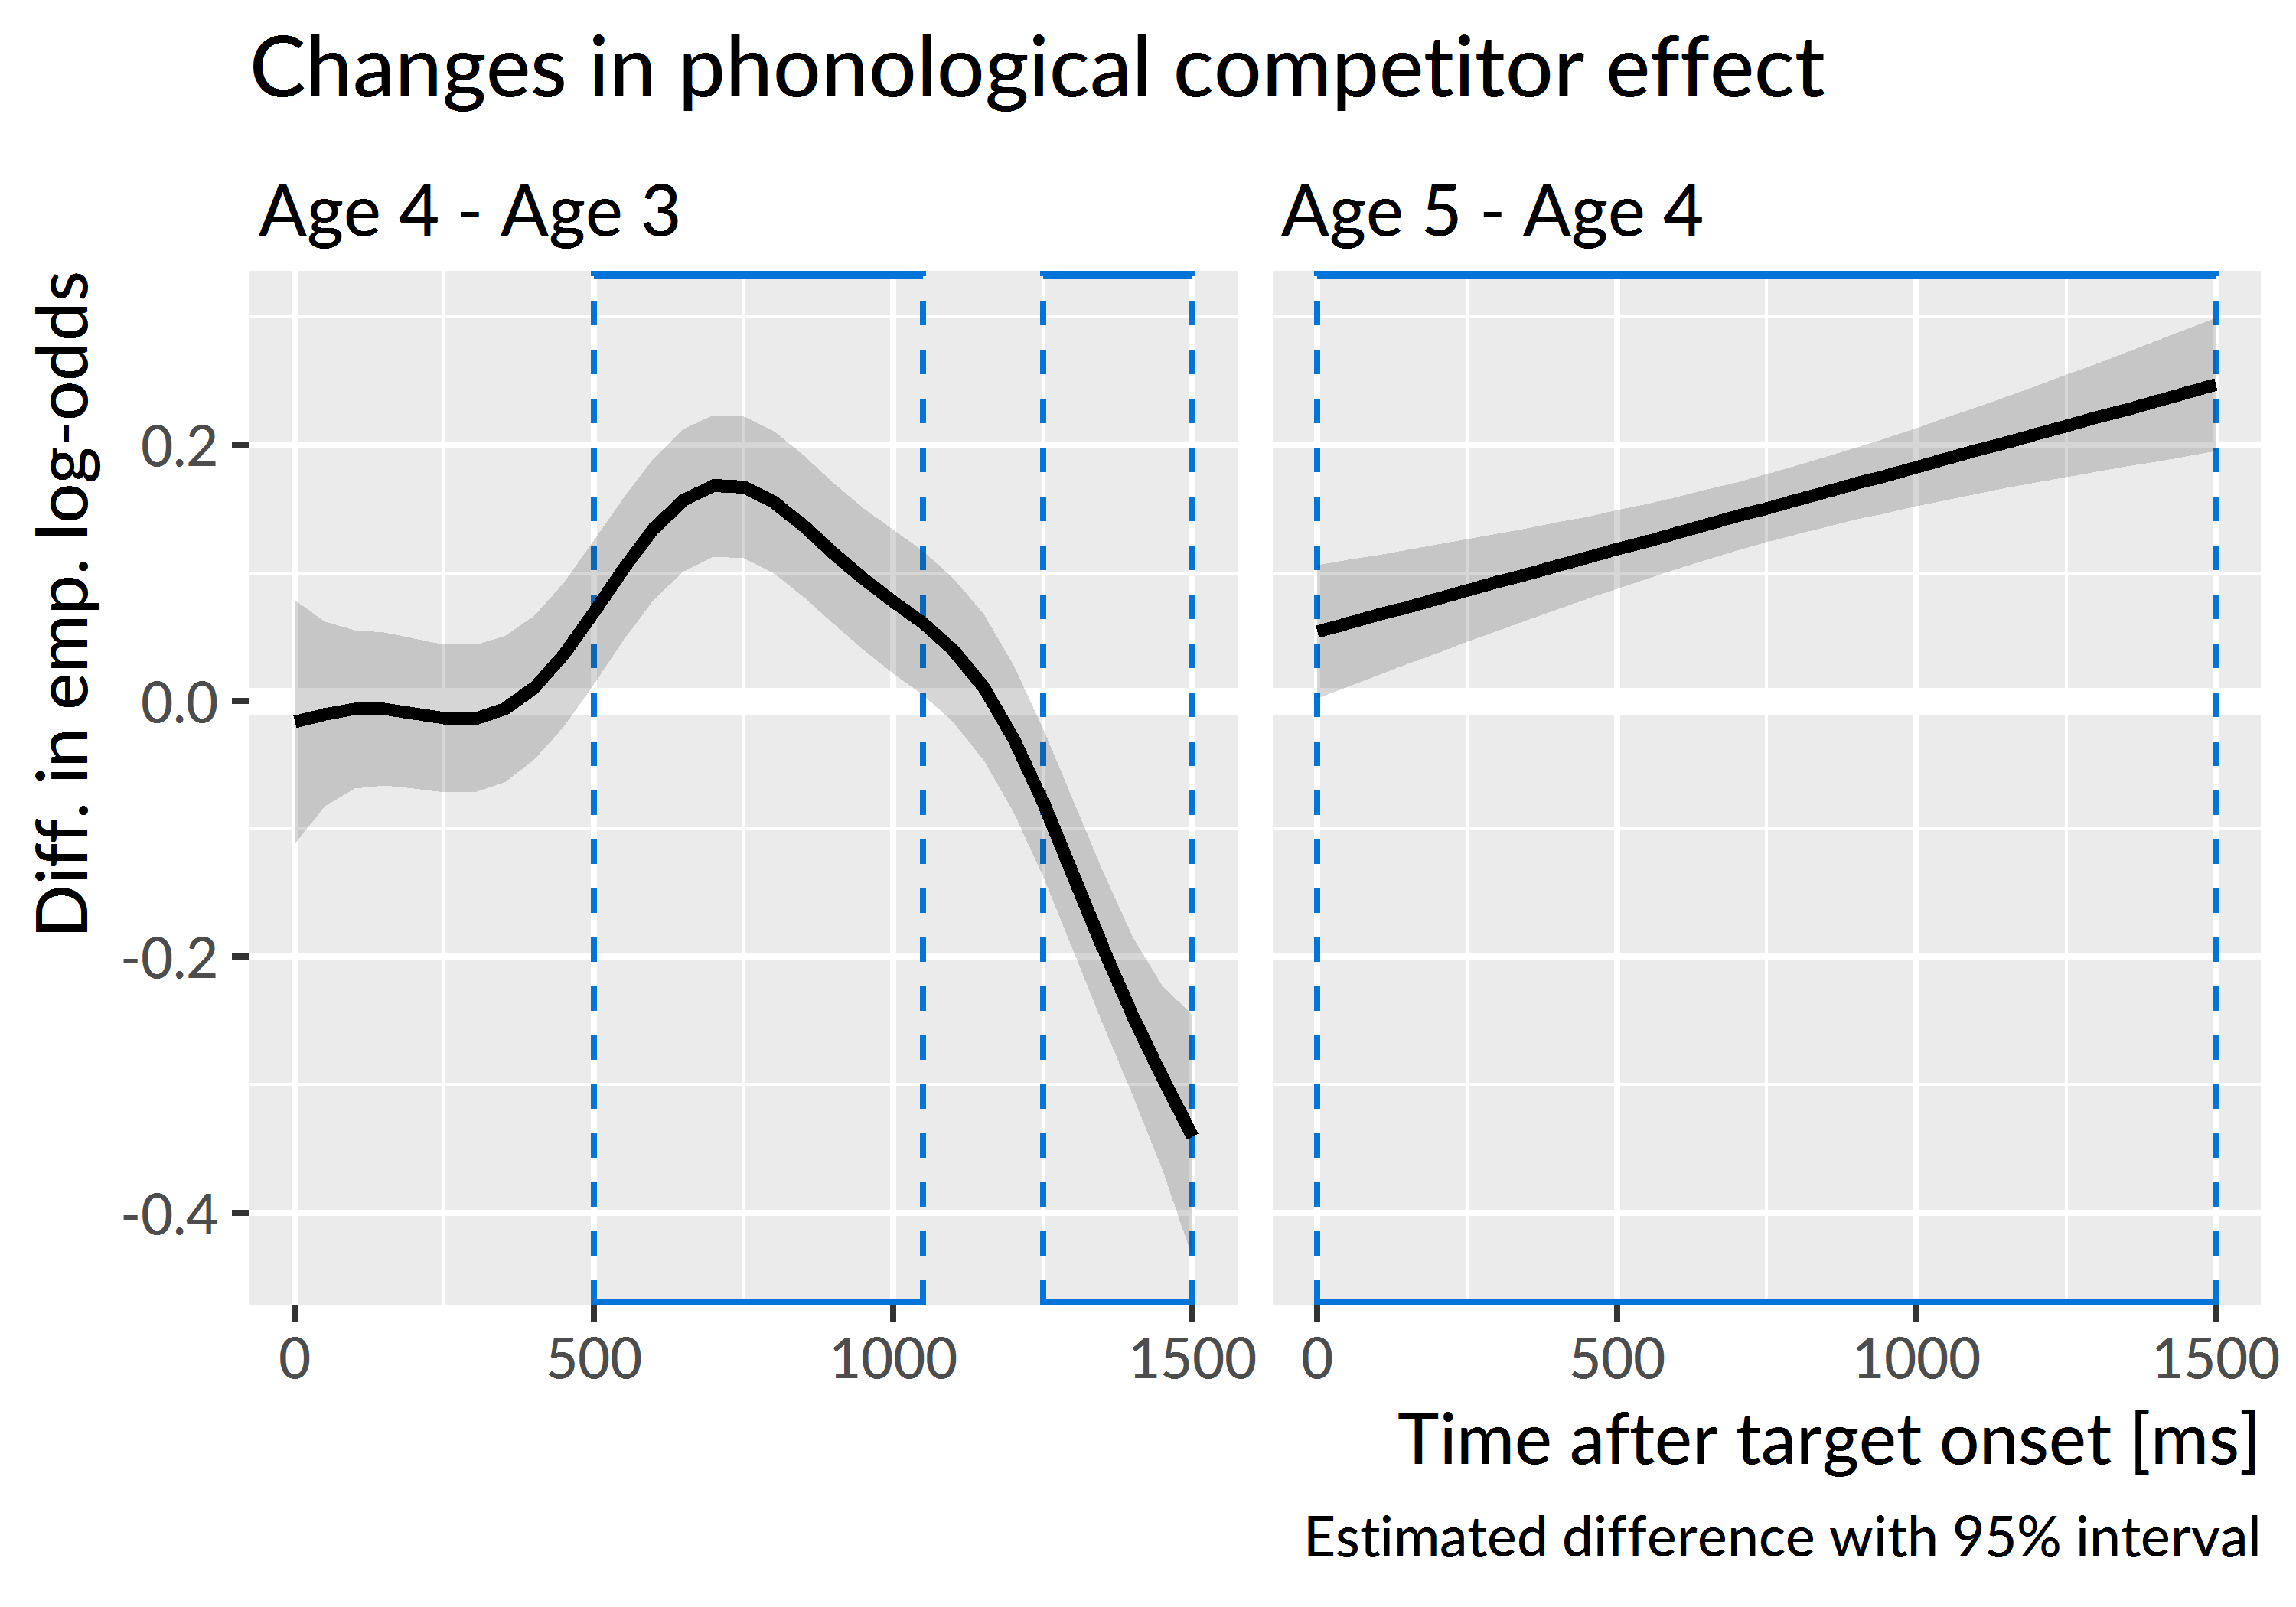 Differences in the average looks to the phonological competitor versus the unrelated image between age 4 and the other ages. Plotted line is estimated difference and the shaded region is the 95% confidence interval around that difference. Boxes highlight regions where the 95% interval excludes zero. From age 3 to age 4, children become more sensitive to the phonological foil during and after the target noun. The linear difference curve for age 4 versus age 5 indicates that the two years largely have the same curvature, but they steadily diverge over the course of the trial.